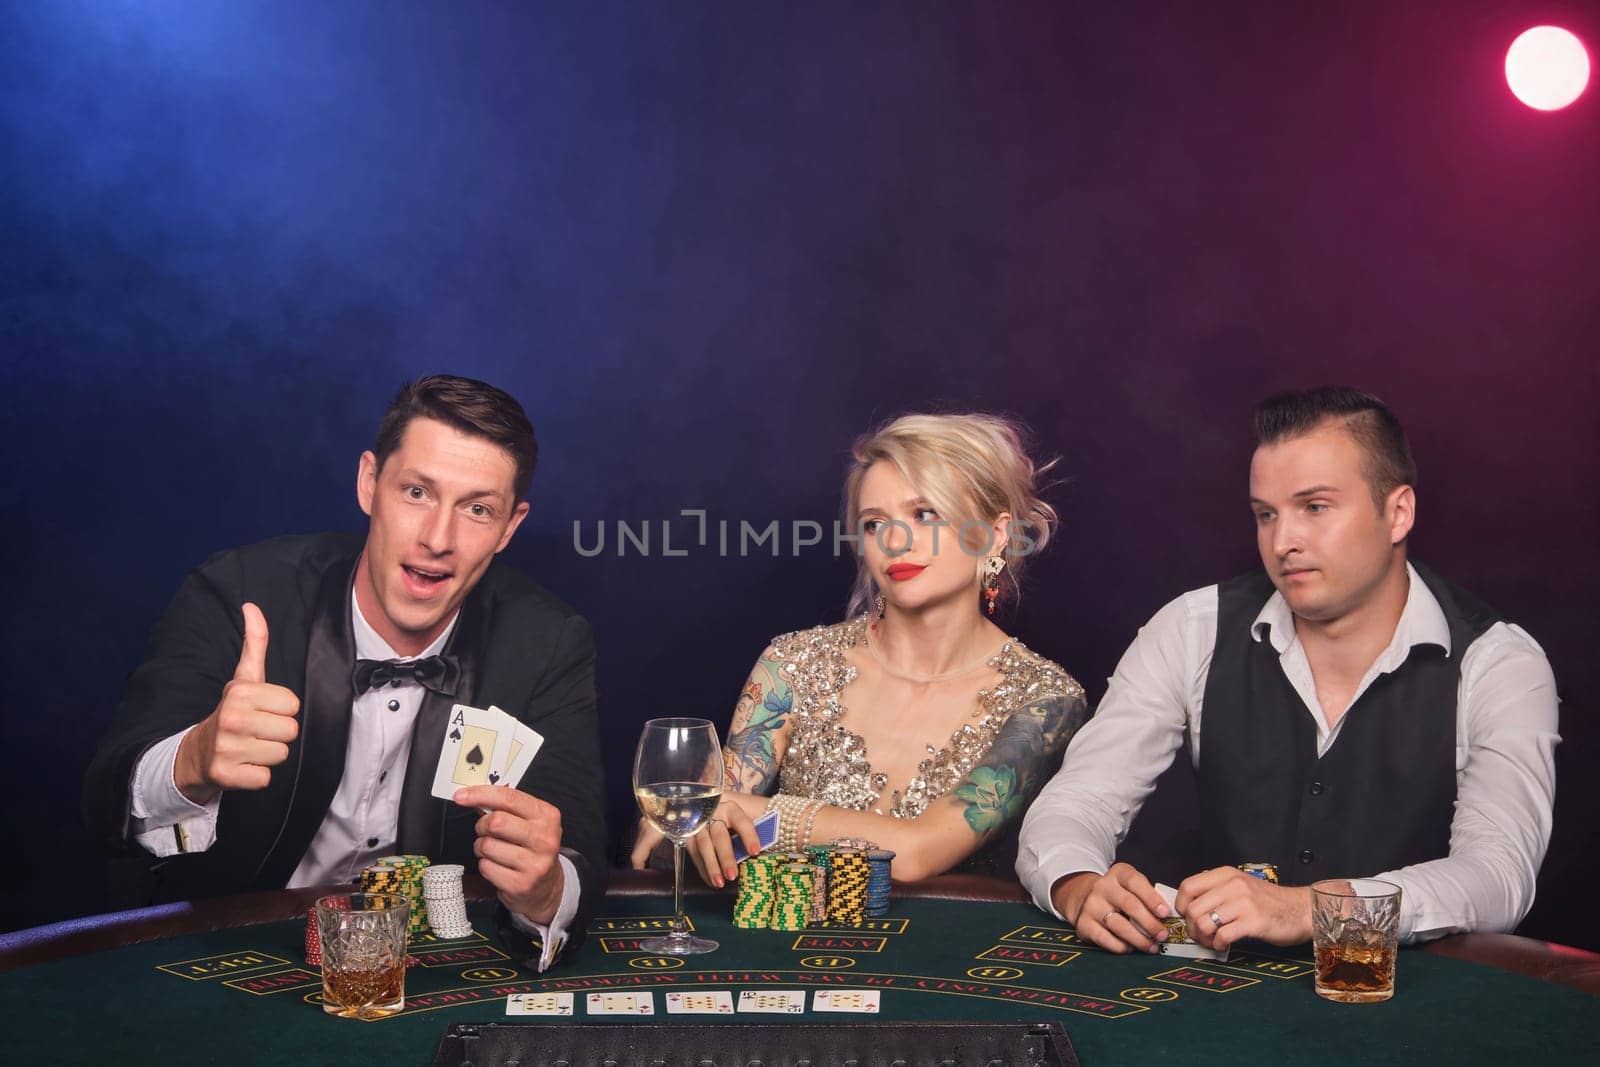 Two wealthy men and charming maiden are playing poker at casino. Youth are making bets waiting for a big win. They are smiling and showing thumb up sitting at the table against a red and blue backlights on black smoke background. Cards, chips, money, gambling, entertainment concept.